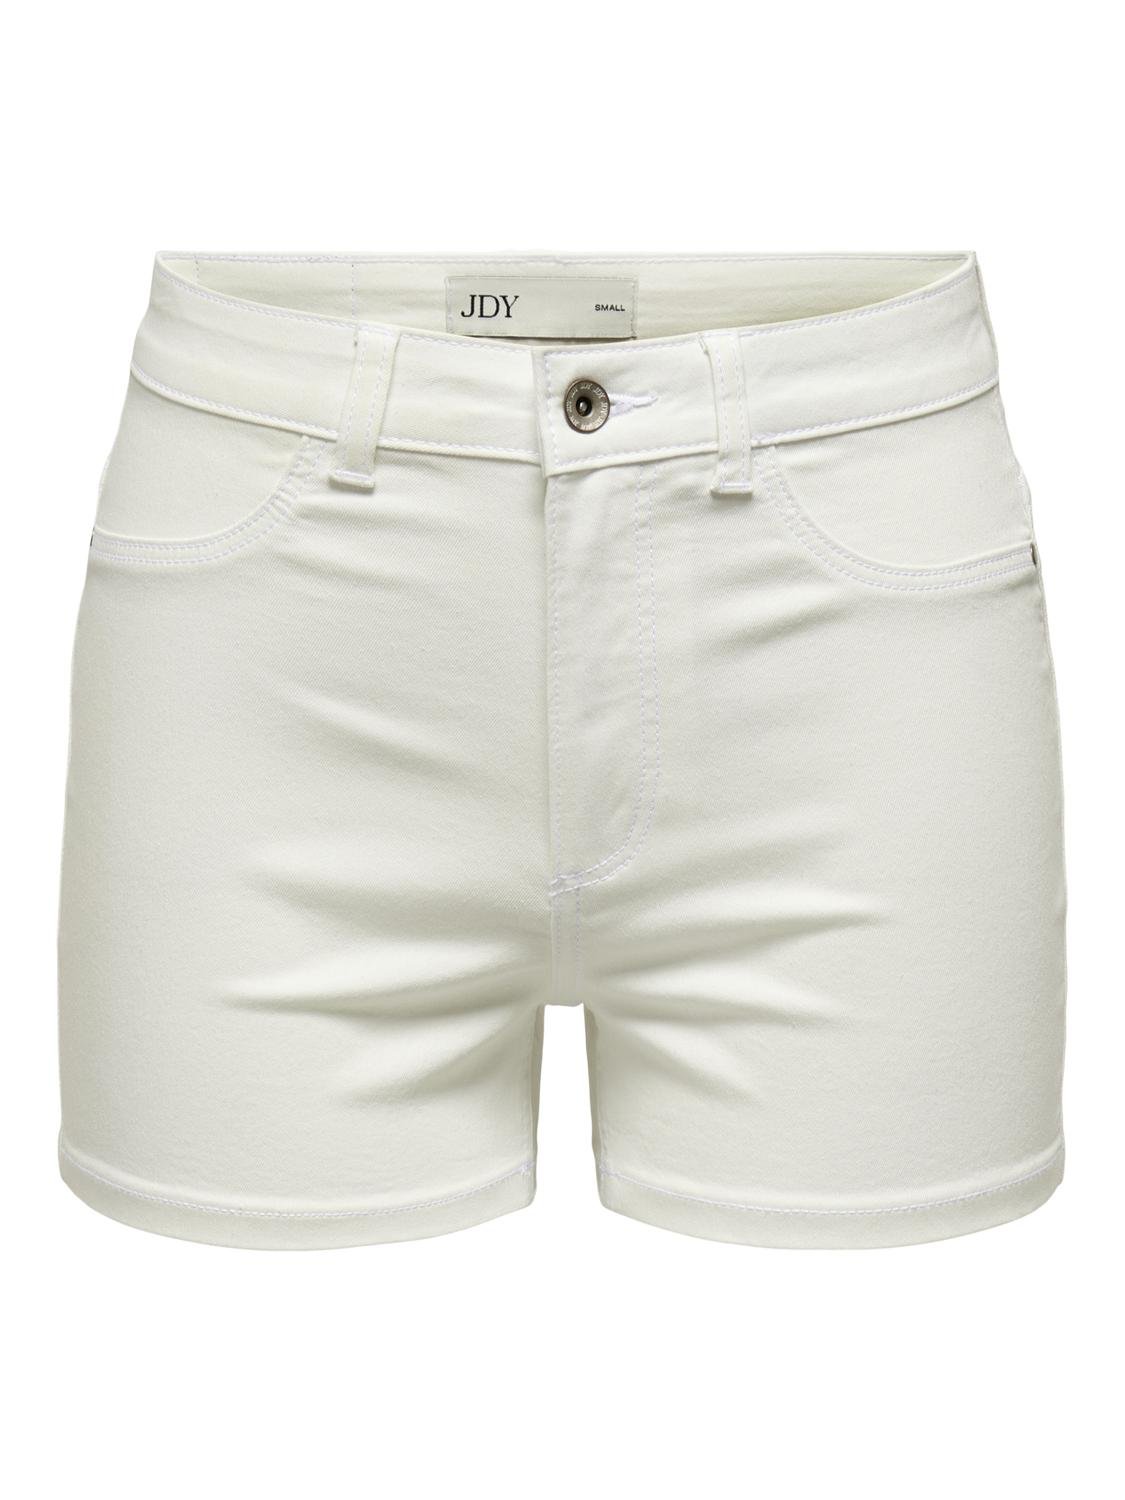 ONLY Shorts Skinny Fit Taille haute -White - 15281790